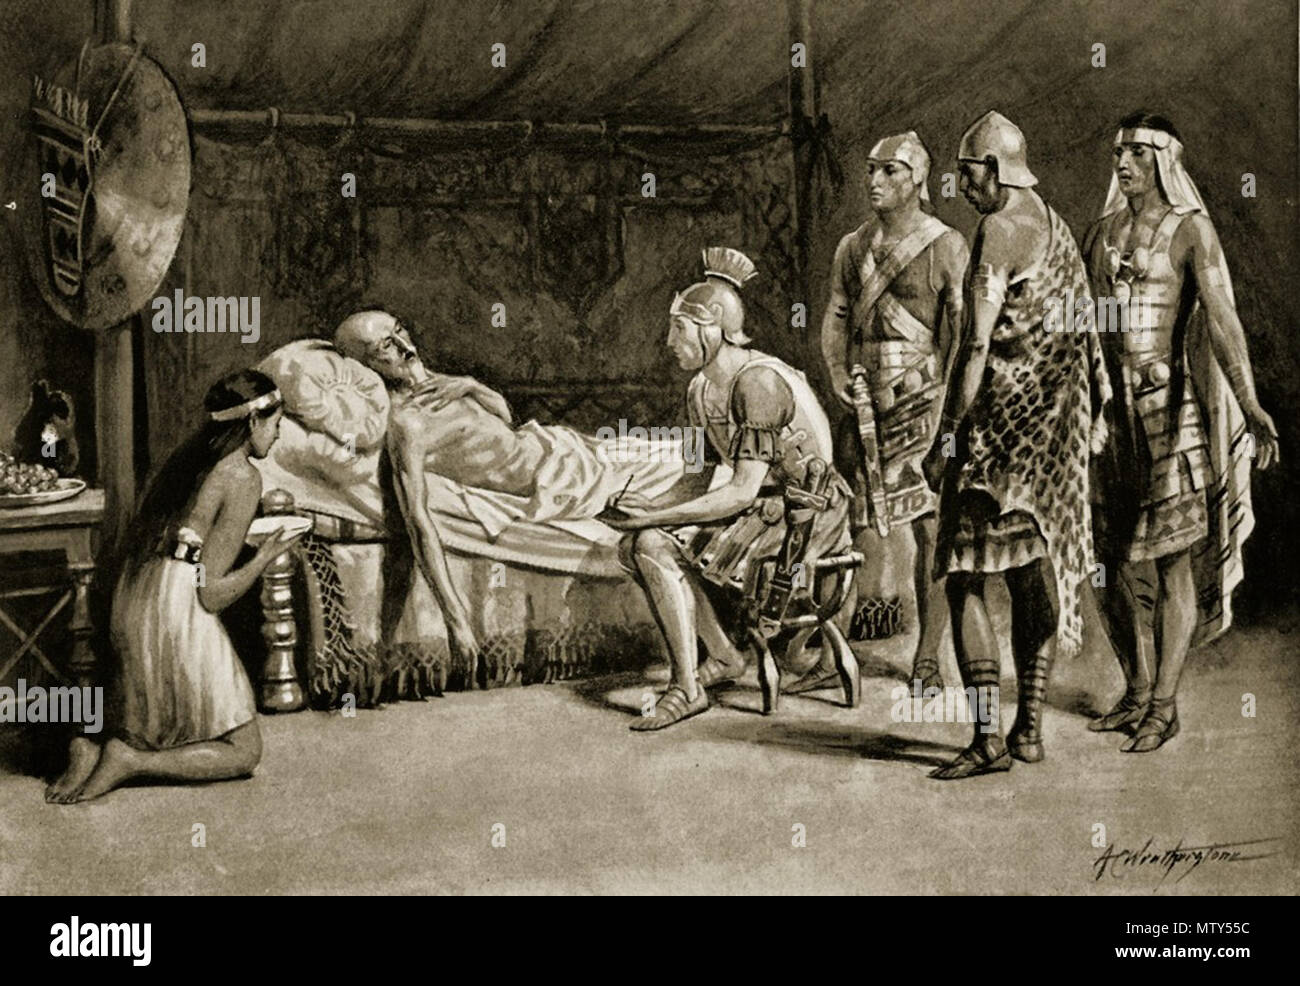 . Scipio at the deathbed of Masinissa (C20) . Masinissa, the king of Numidia (c.240 – 148 B.C), died in 148 B.C., still at odds with the Roman governement; He honoured Scipio Aemilianus (185 – 129 BC), who was present at his death, by asking him to divide the kingdom between Masinissa's three sons . C20  548 Scipio at the deathbed of Masinissa (C20) Stock Photo